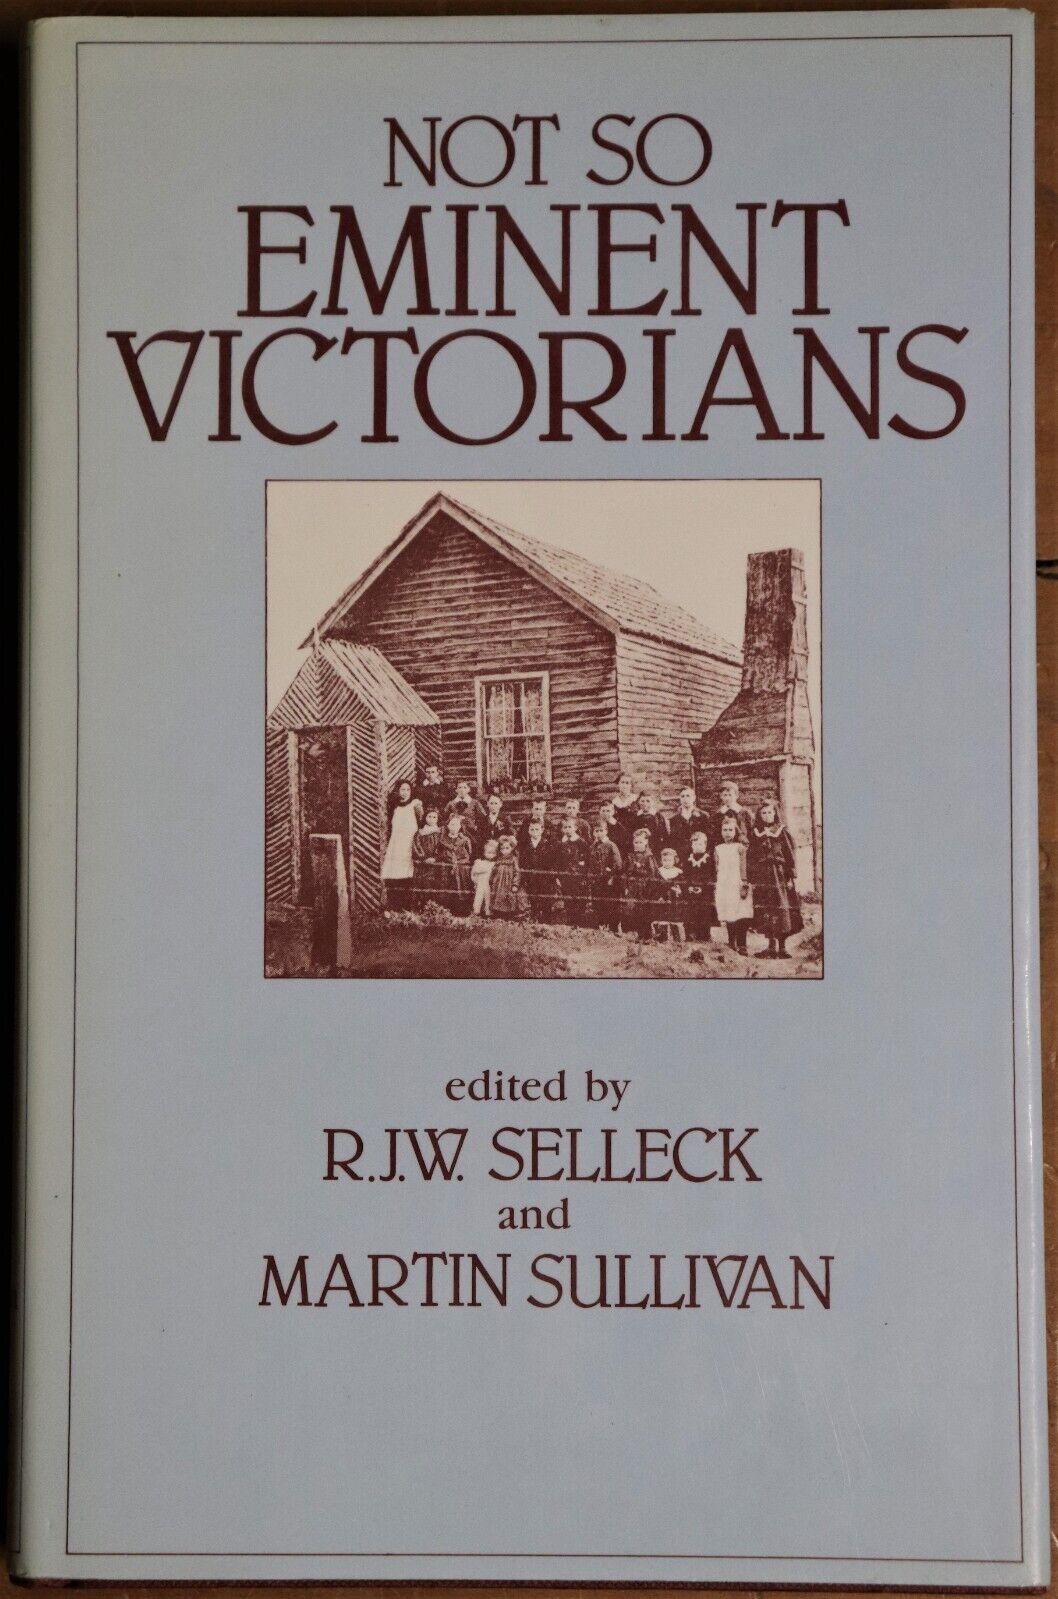 Not So Emminent Victorians - 1984 - Melbourne Local History Book